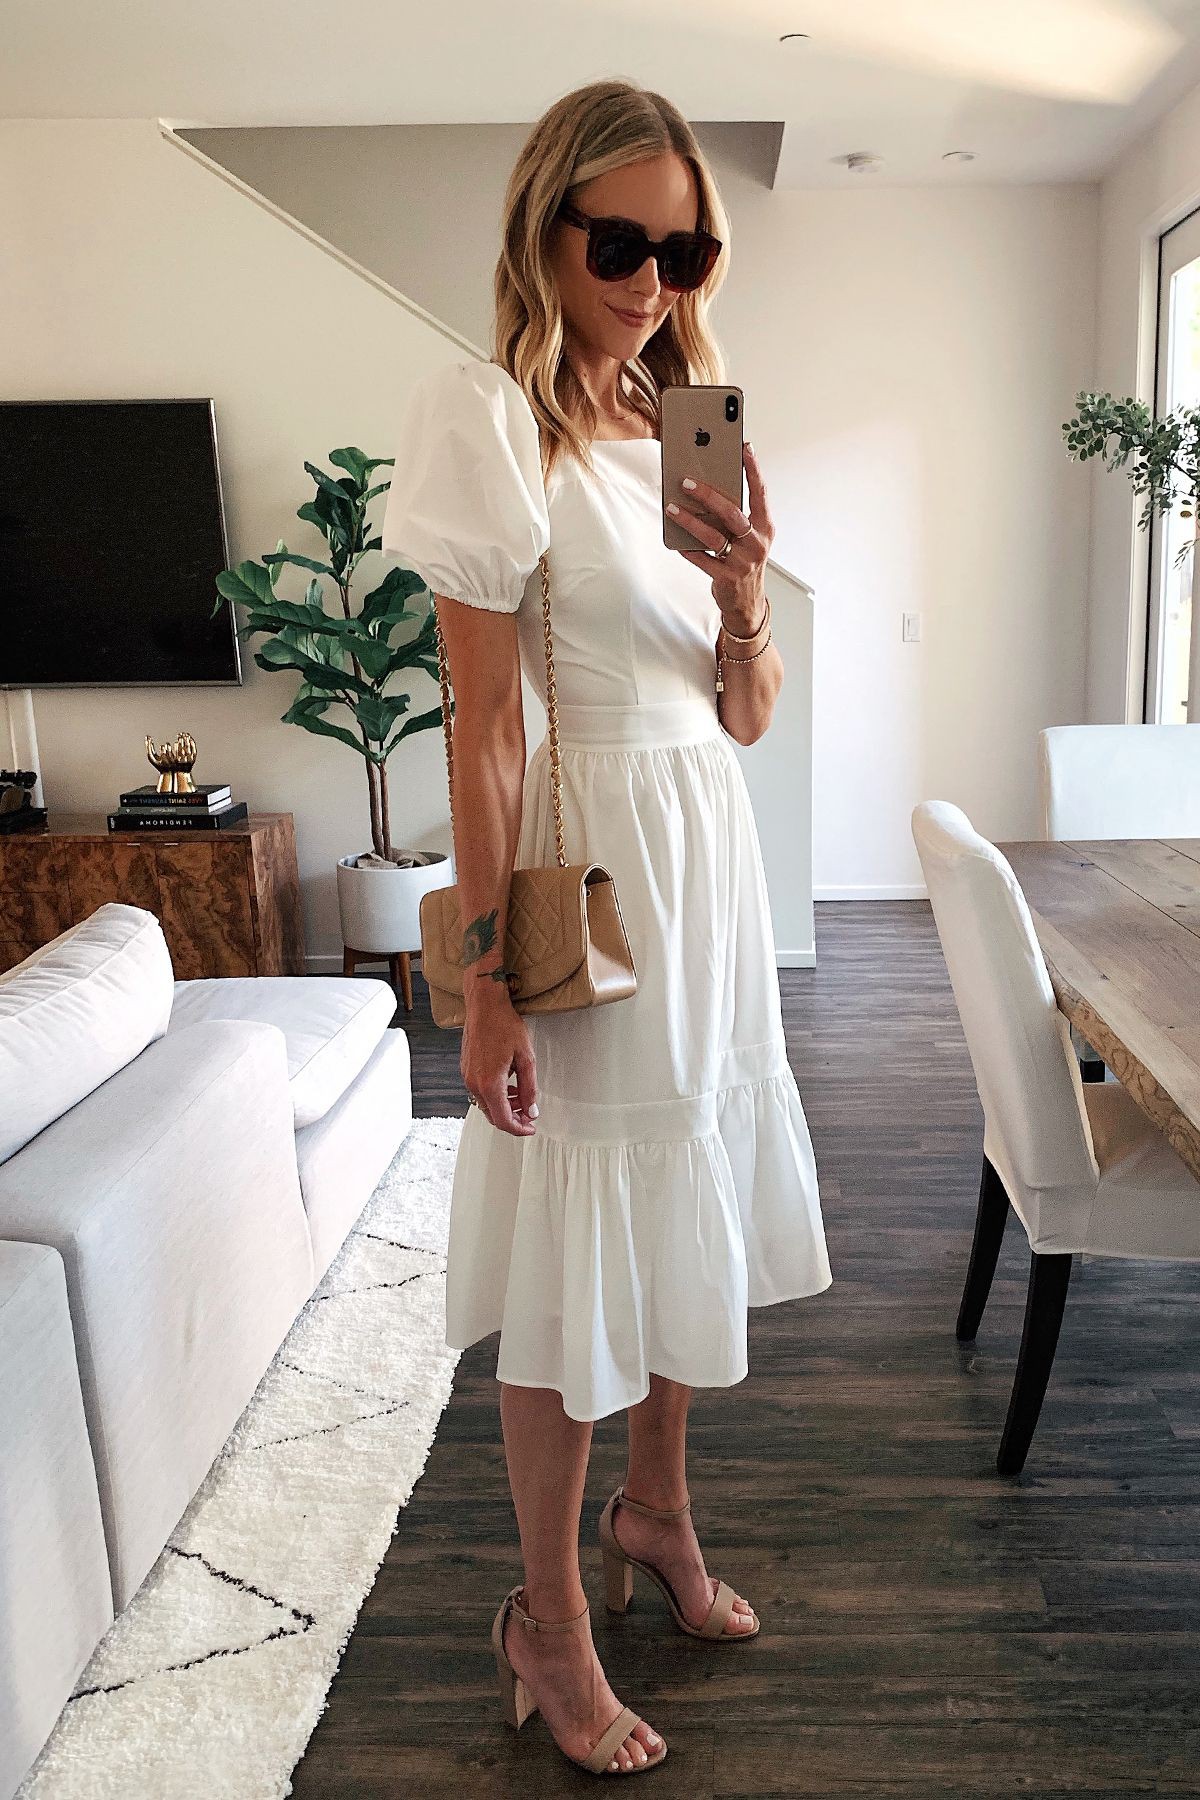 Brunch Outfit Ideas, High-heeled shoe, Cocktail dress: Cocktail Dresses,  High-Heeled Shoe,  Casual Outfits,  Brunch Outfit  